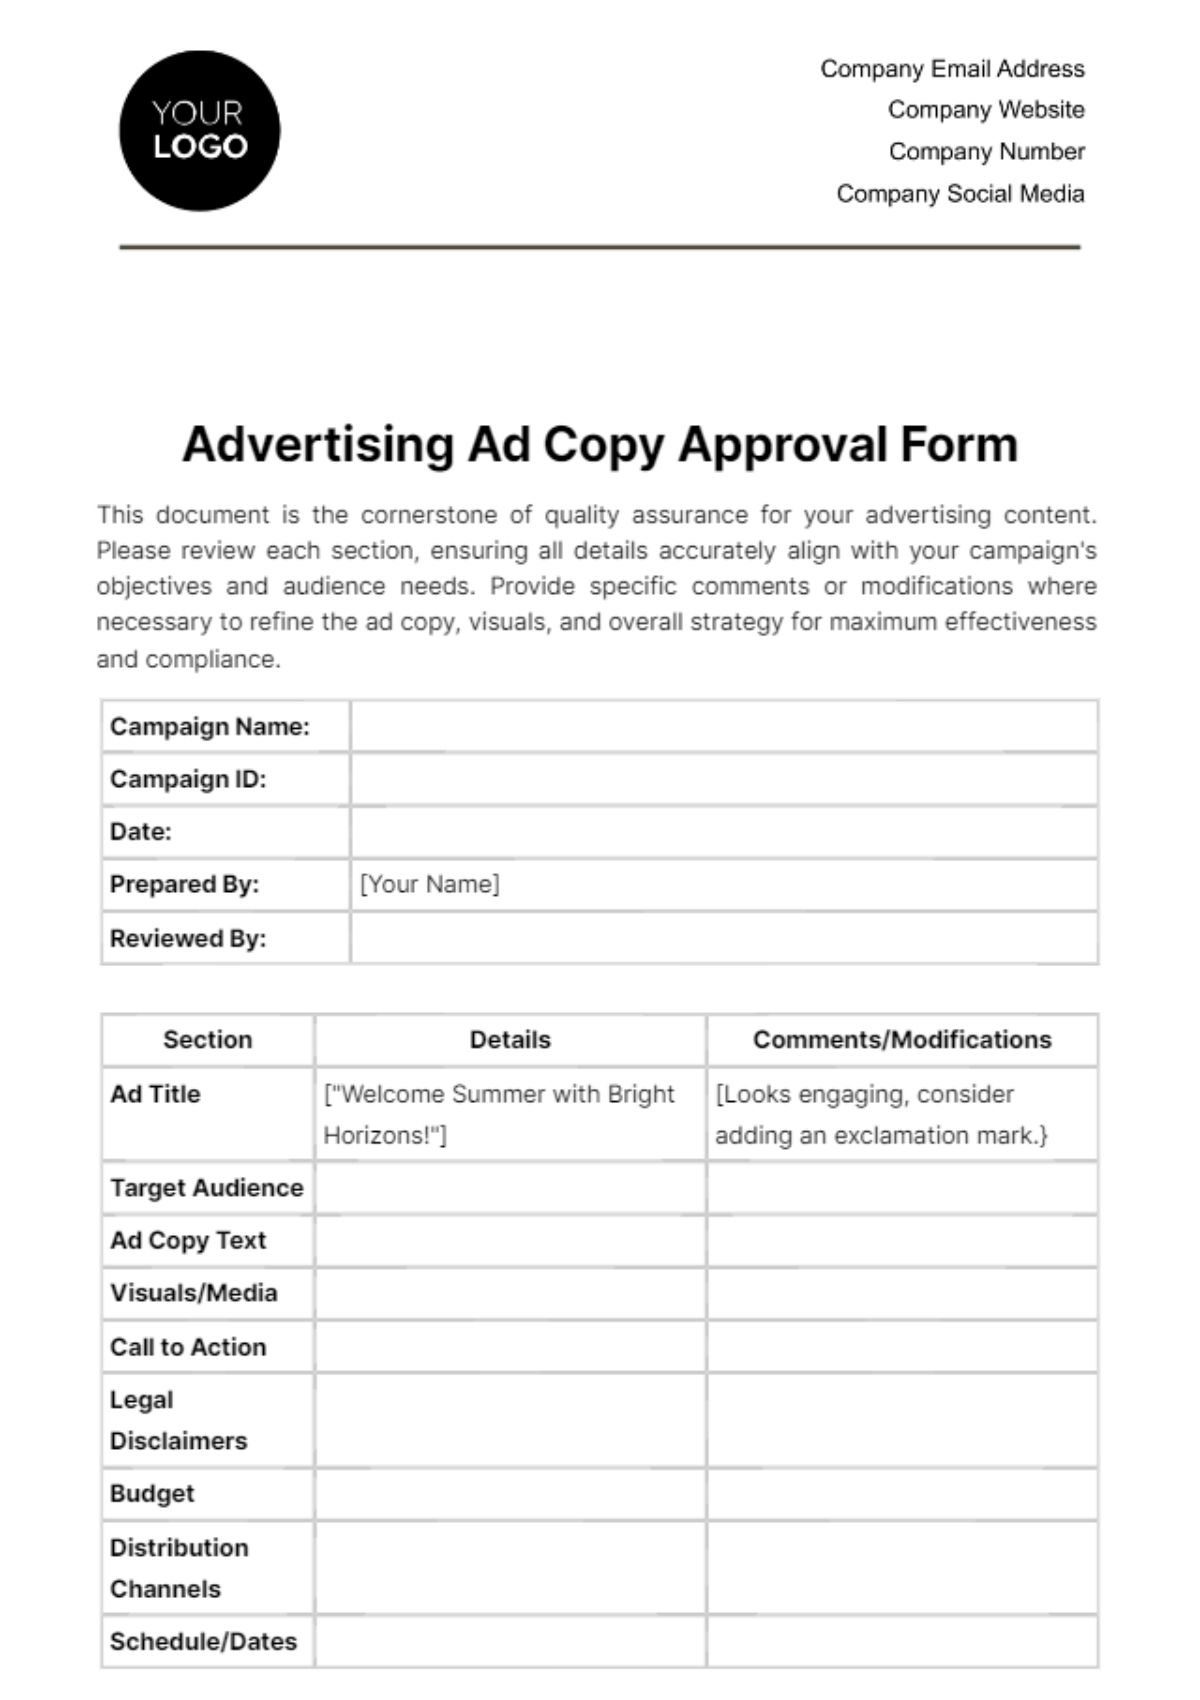 Advertising Ad Copy Approval Form Template